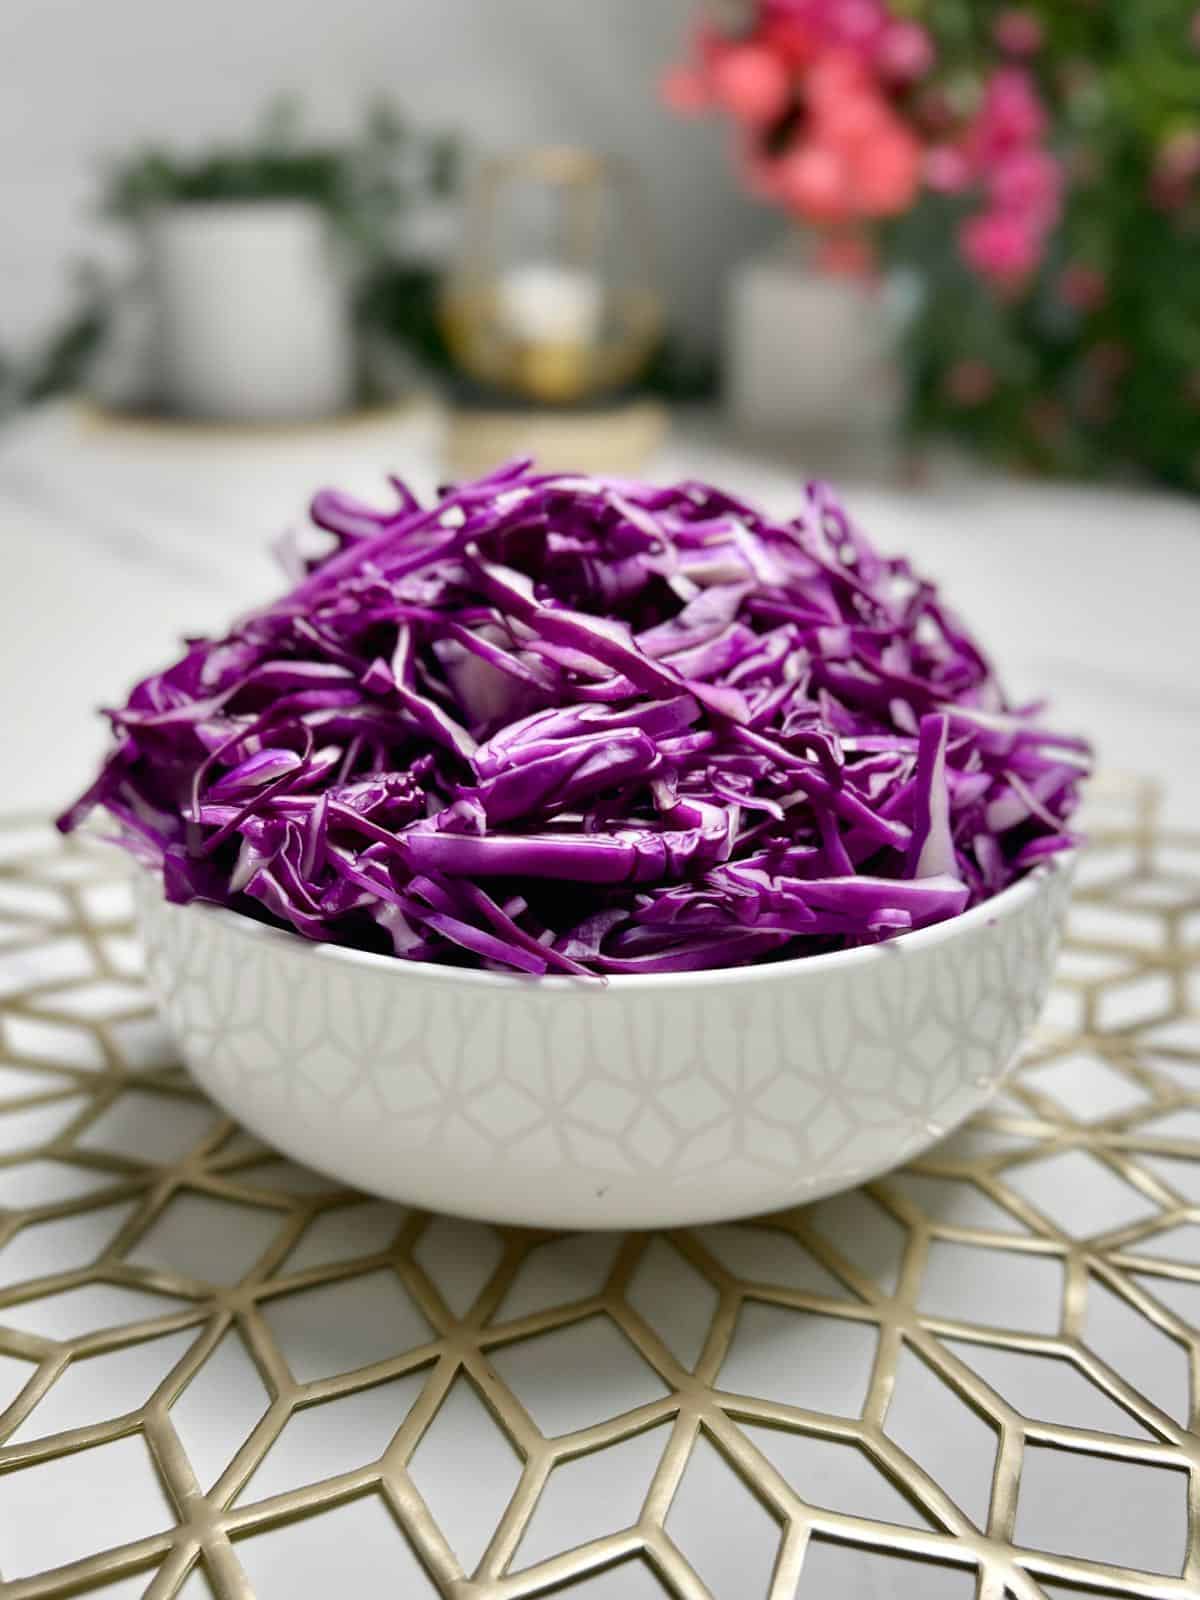 shredded purple cabbage in a bowl